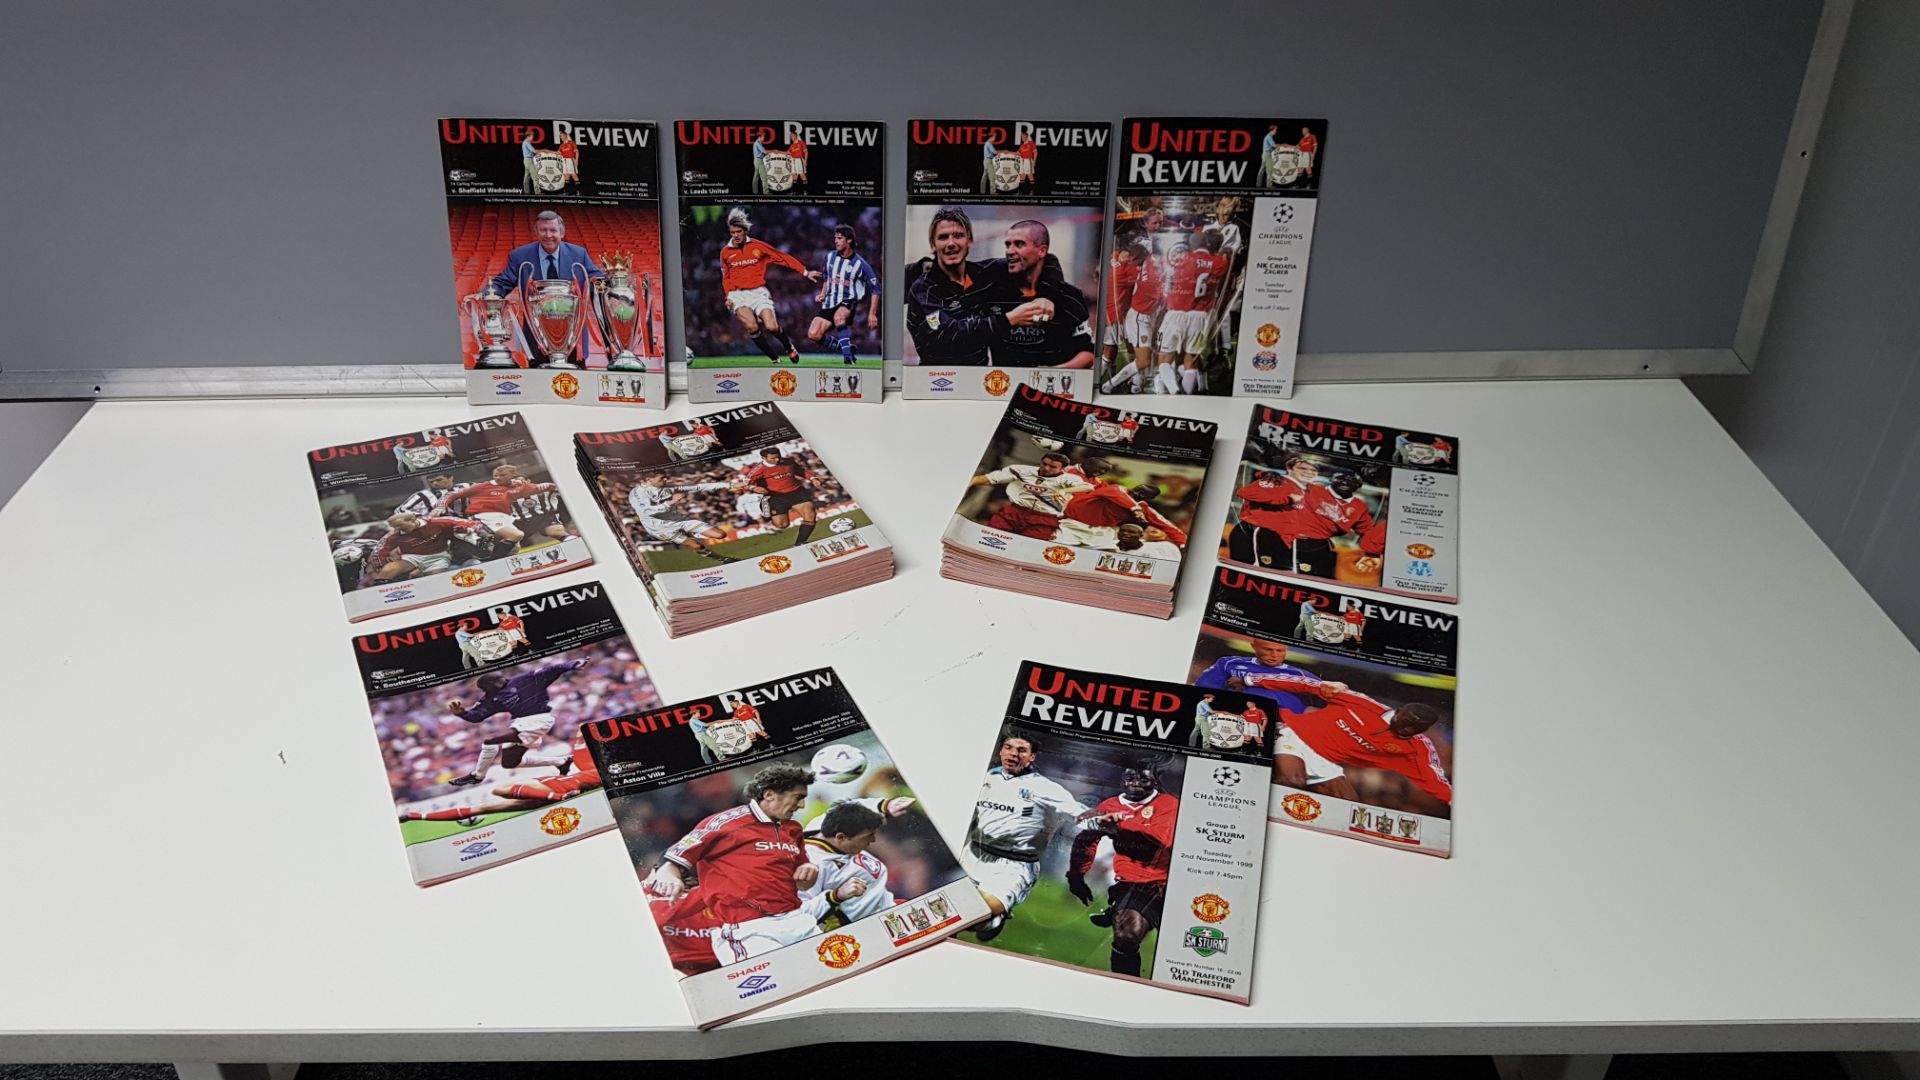 COMPLETE COLLECTION OF MANCHESTER UNITED HOME GAME PROGRAMMES FROM THE 1999/2000 SEASON. FROM